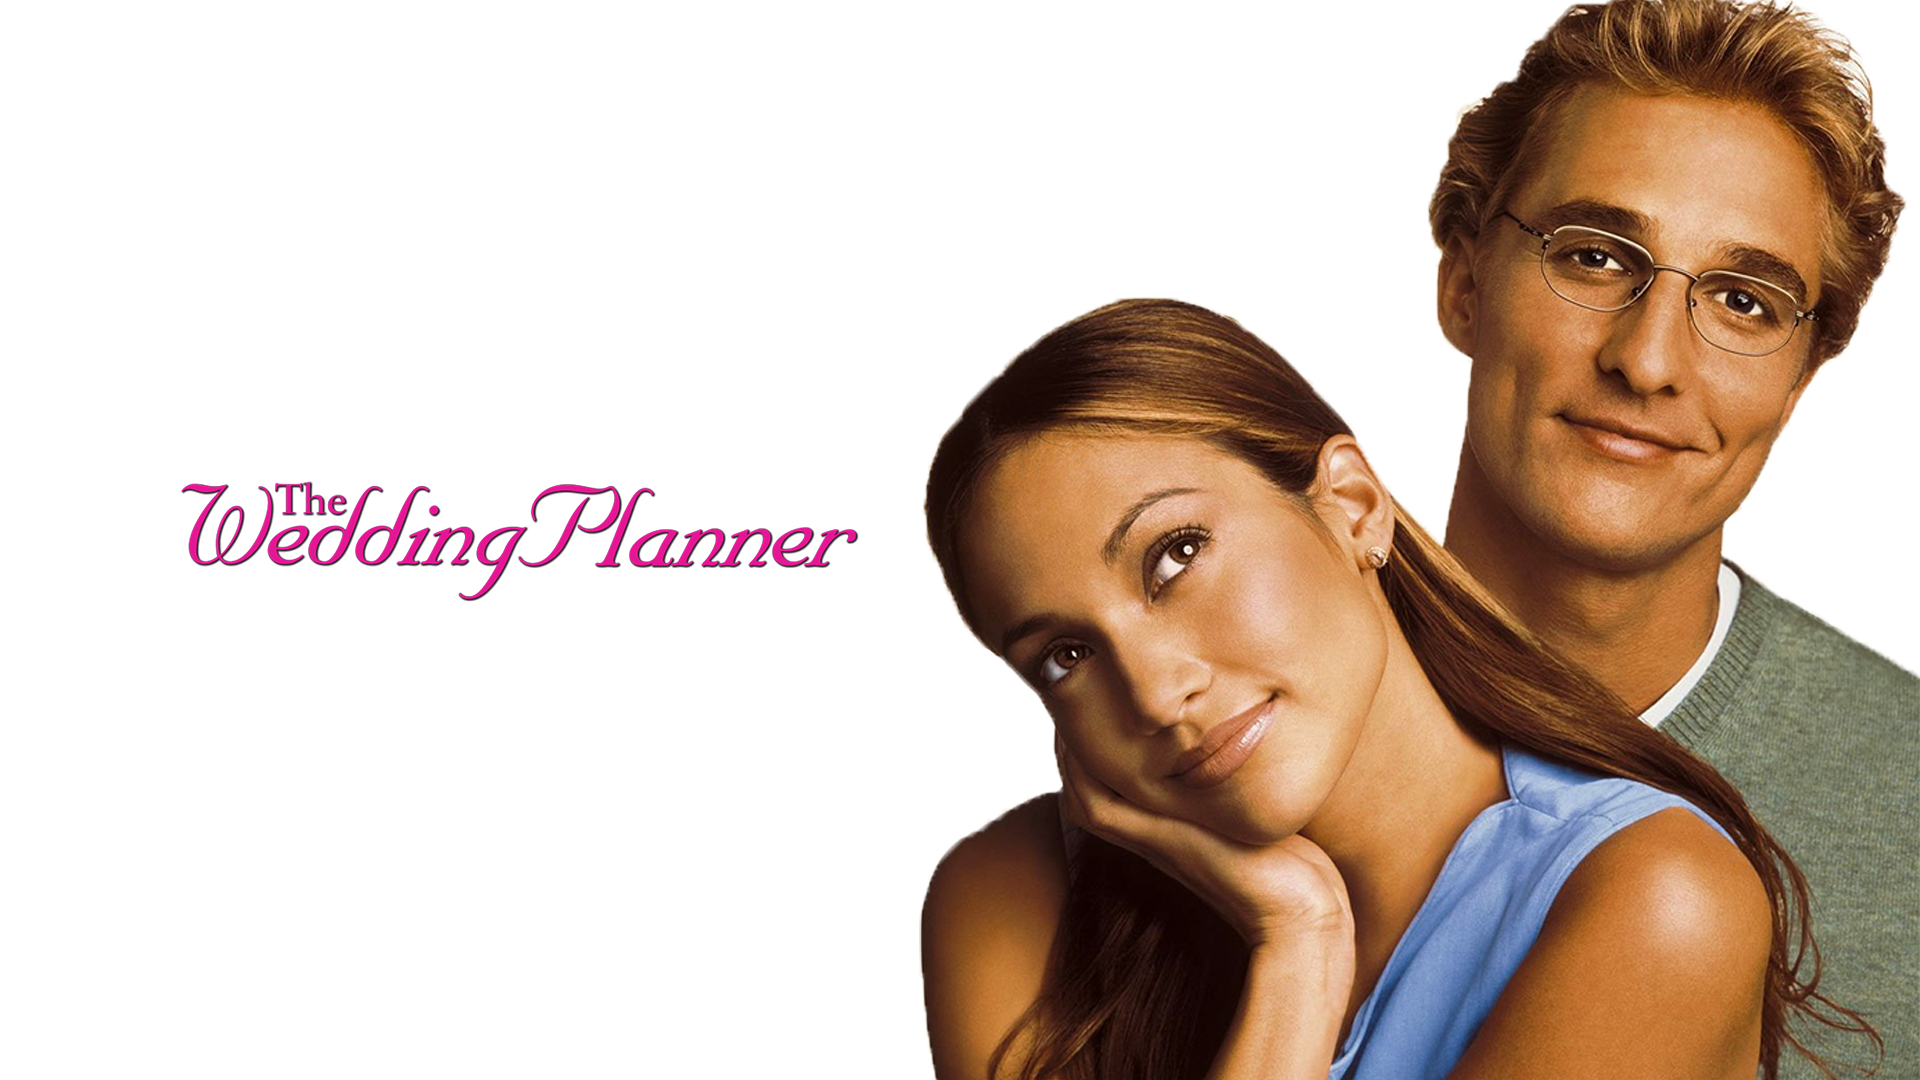 THE WEDDING PLANNER [2001] - Official Trailer (HD) 